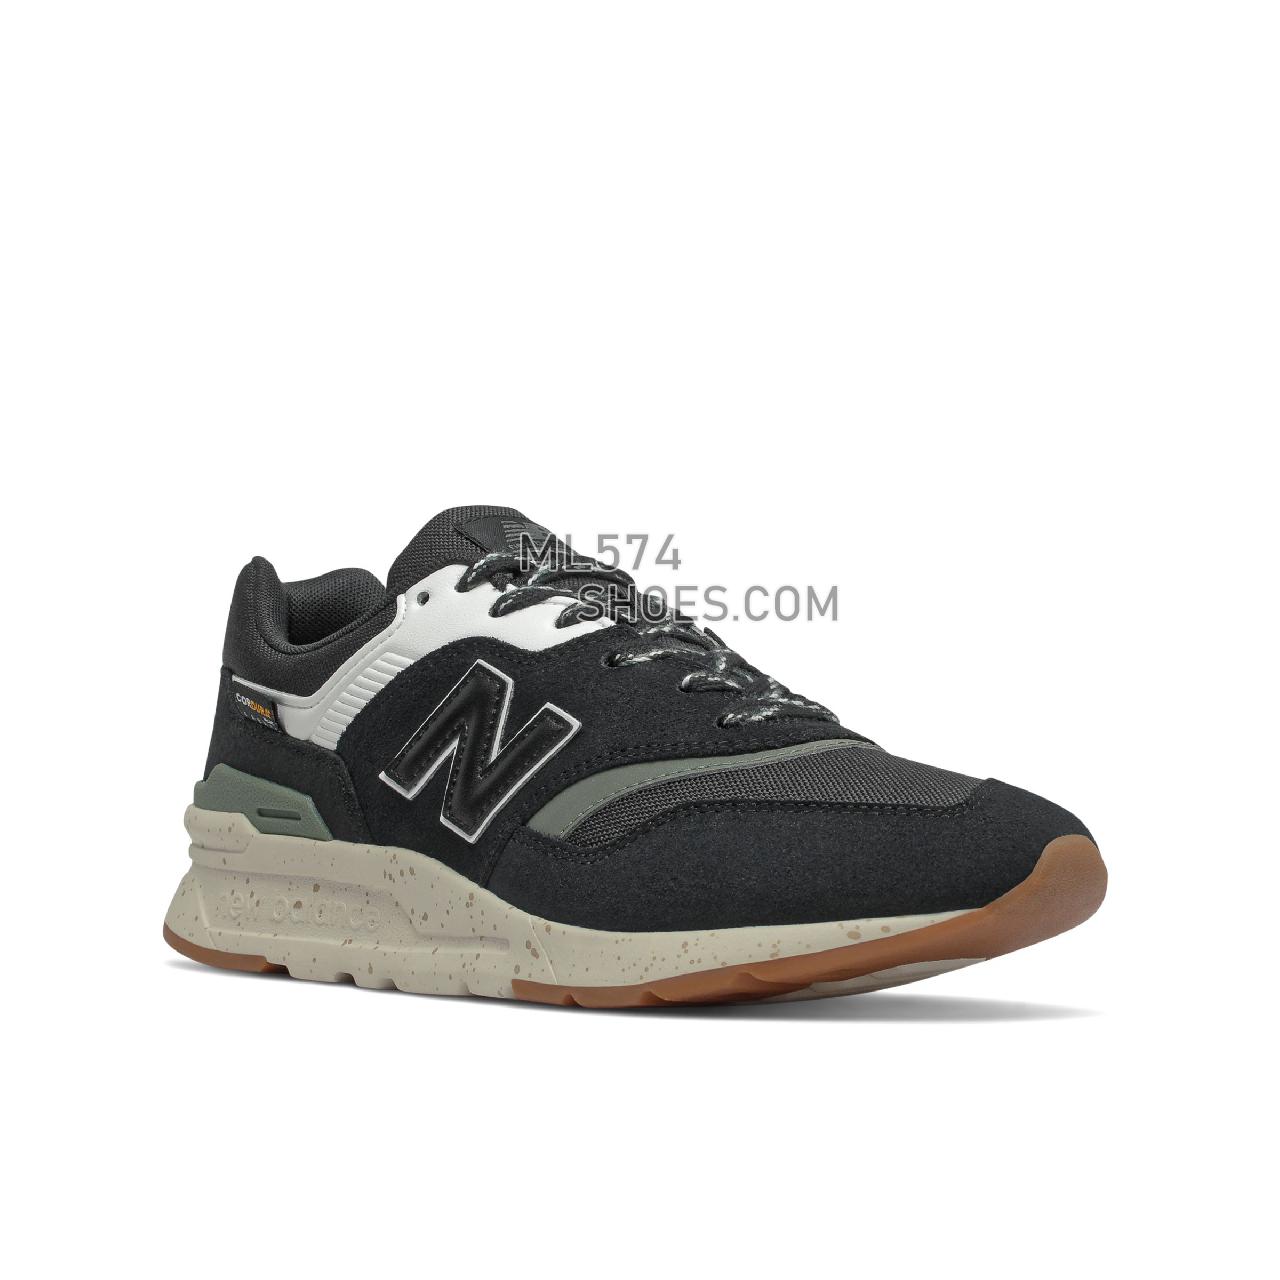 New Balance 997H - Men's Classic Sneakers - Black with Norway Spruce - CM997HPP